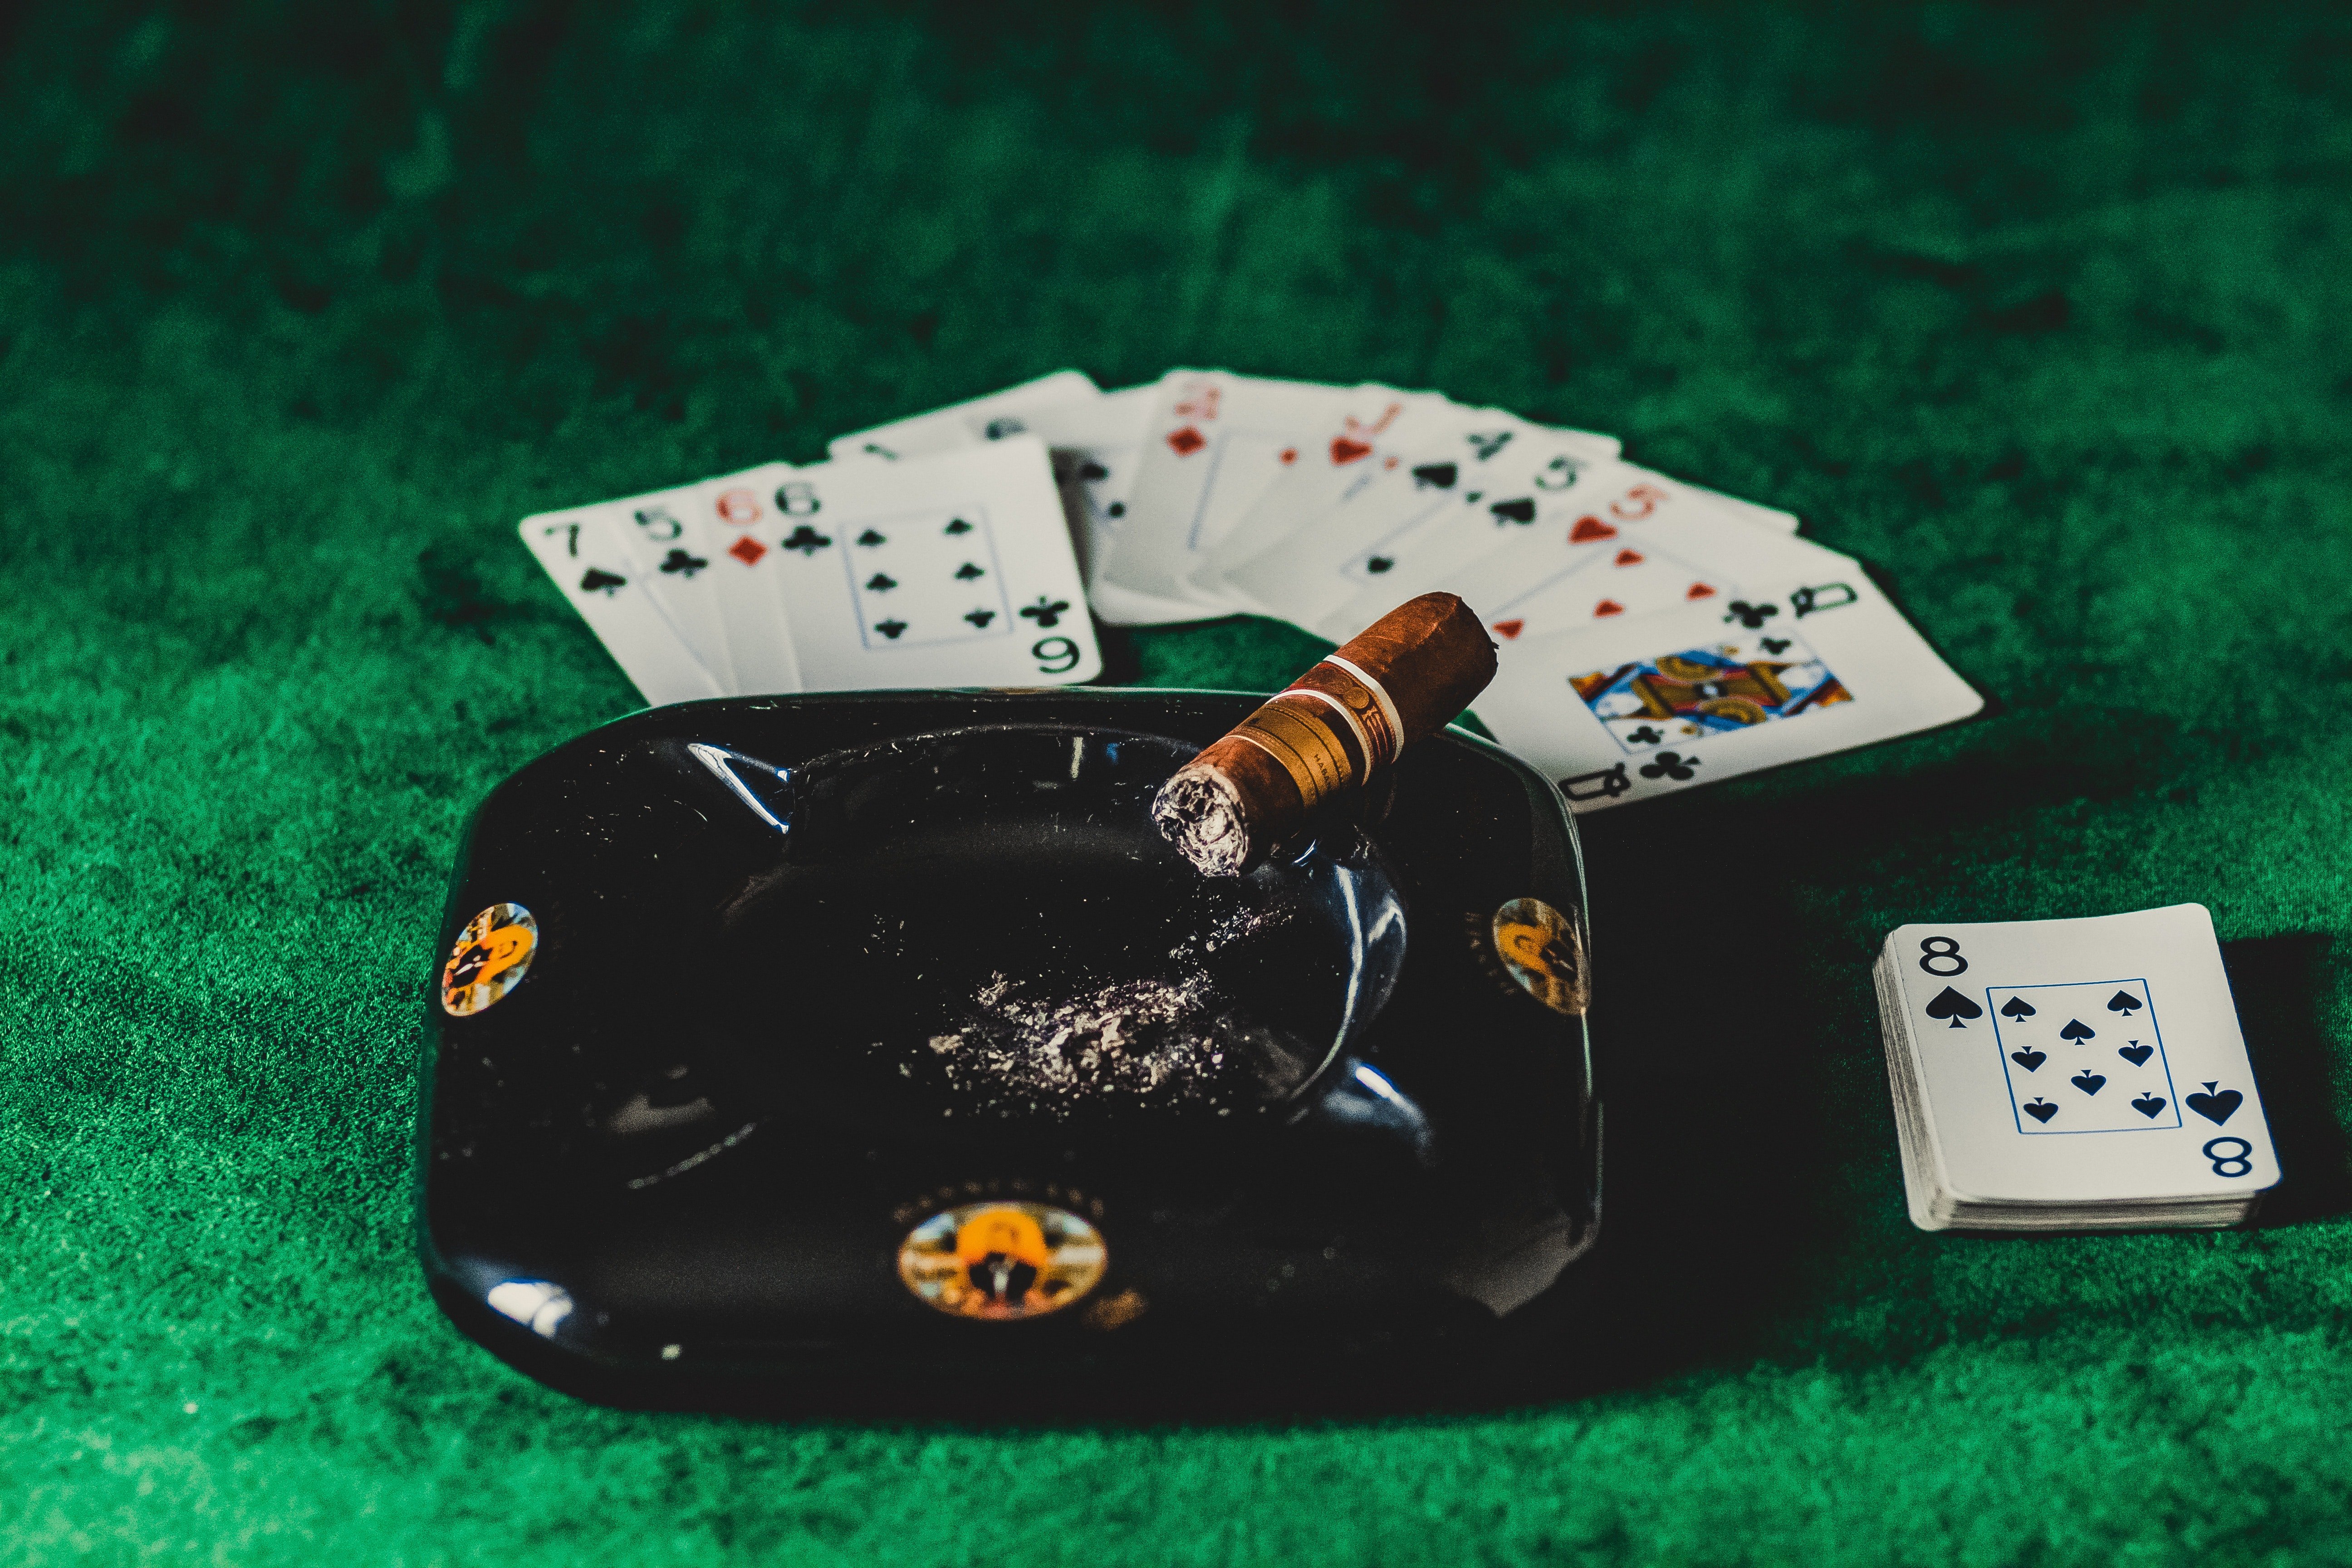 Blog, says about gambling - essential information